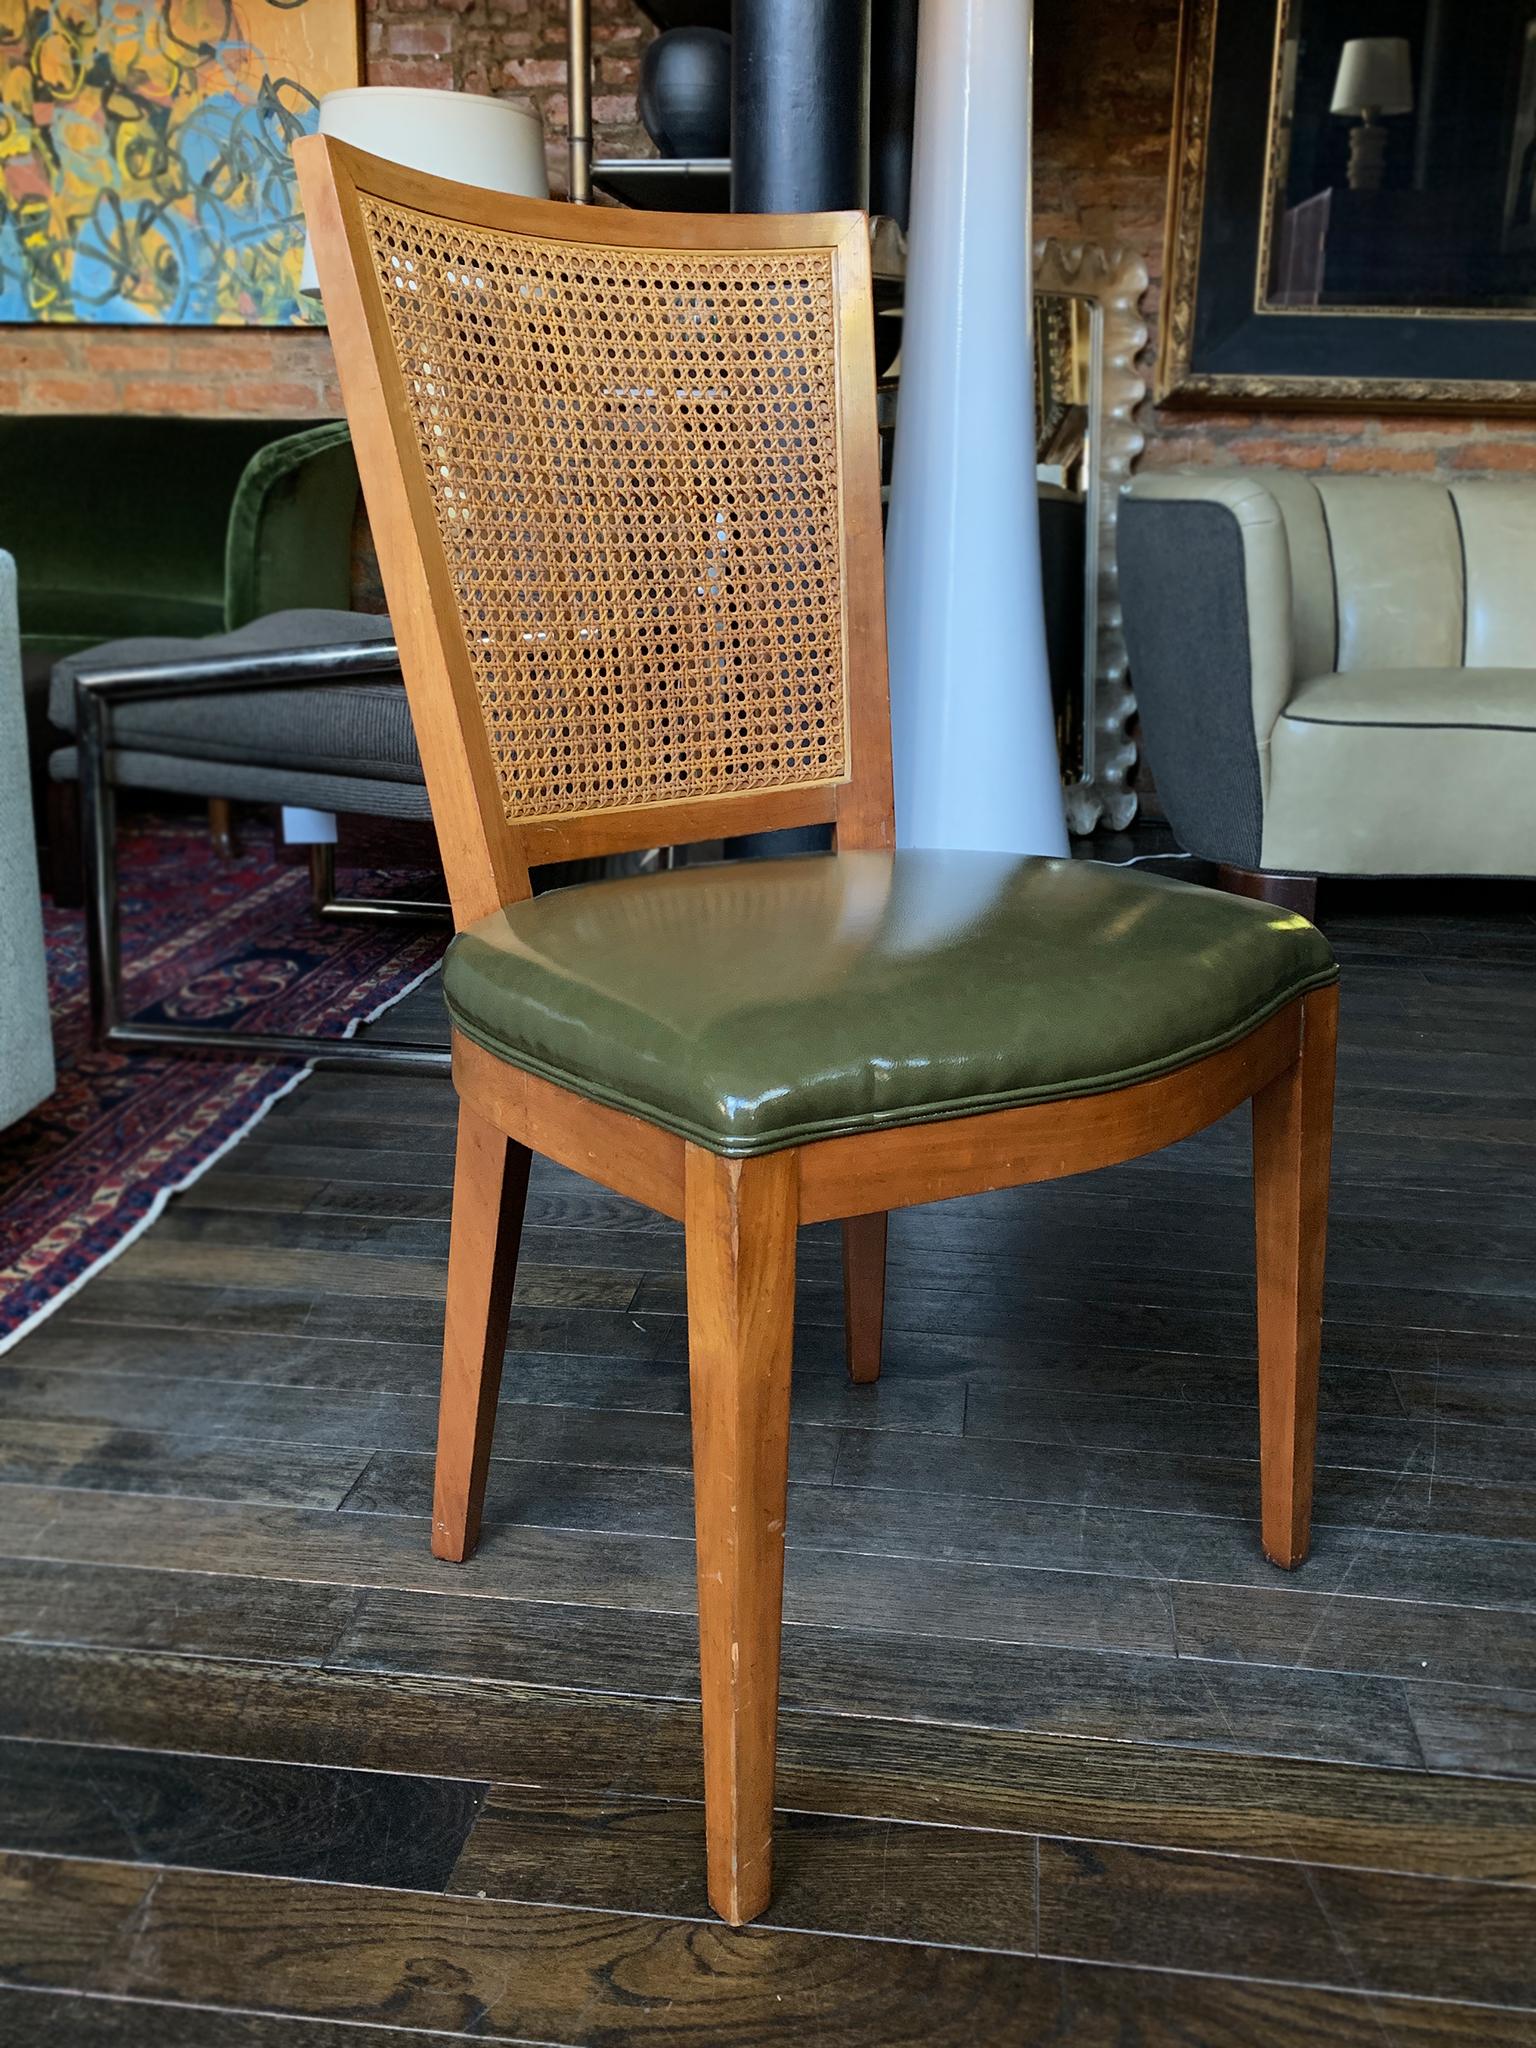 A set of 4 dining chairs made by the Baker Furniture Company in the mid-20th century. The chairs are crafted from beech wood with a caning back and new faux leather upholstery. Their height is lower than other dining chairs, and closer to the height